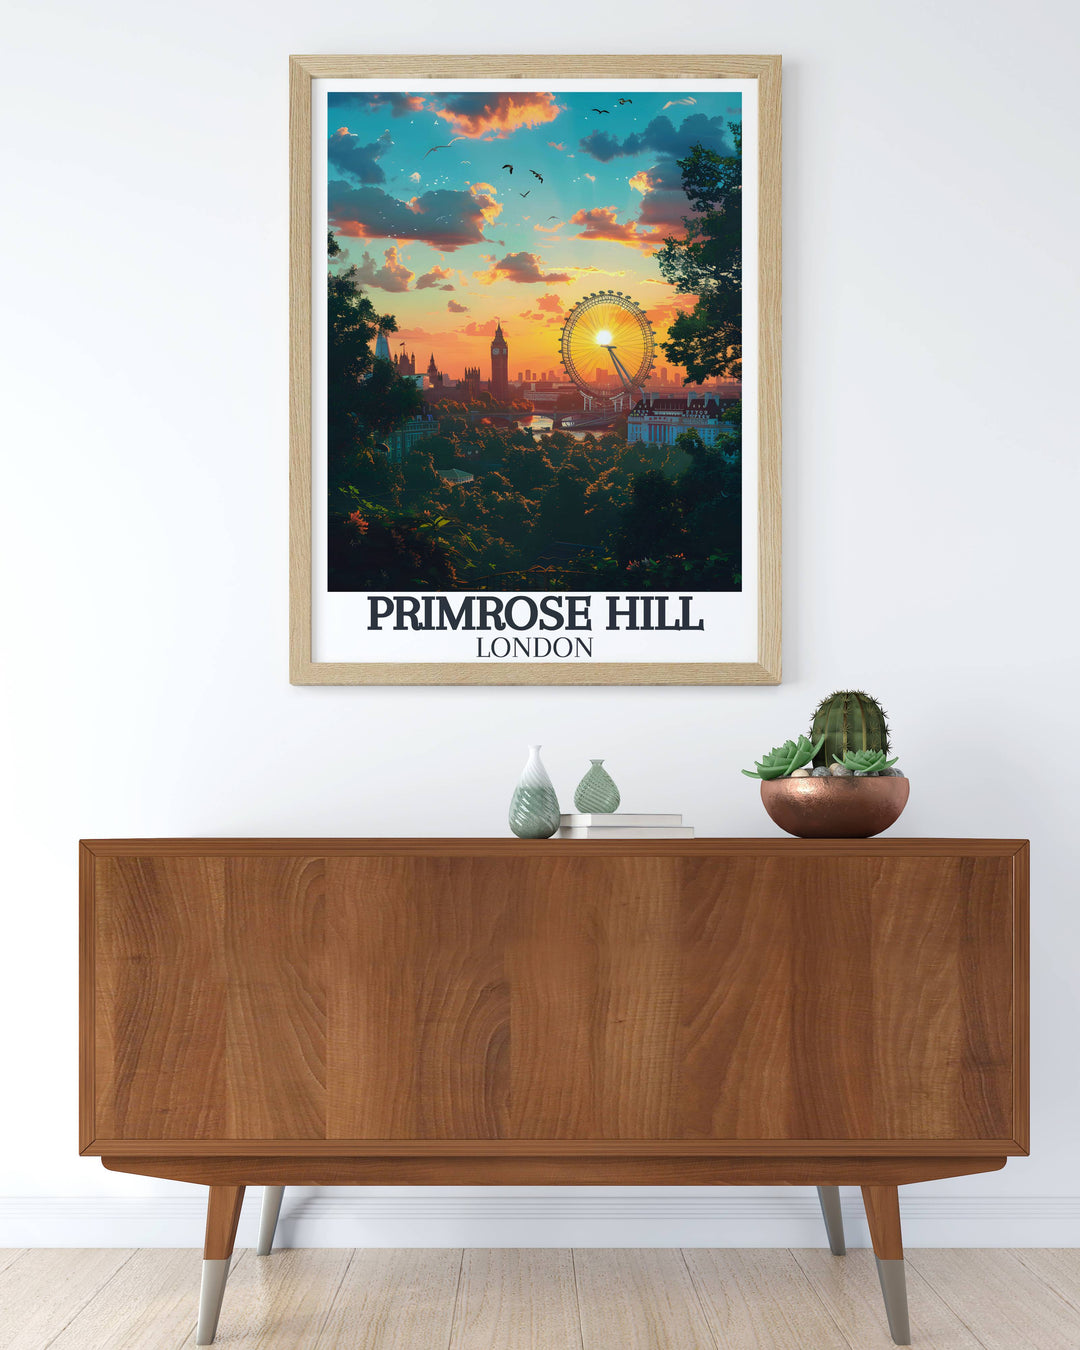 Primrose Hill art print highlighting the serene landscape and iconic views, contrasted with Camden Towns dynamic energy.